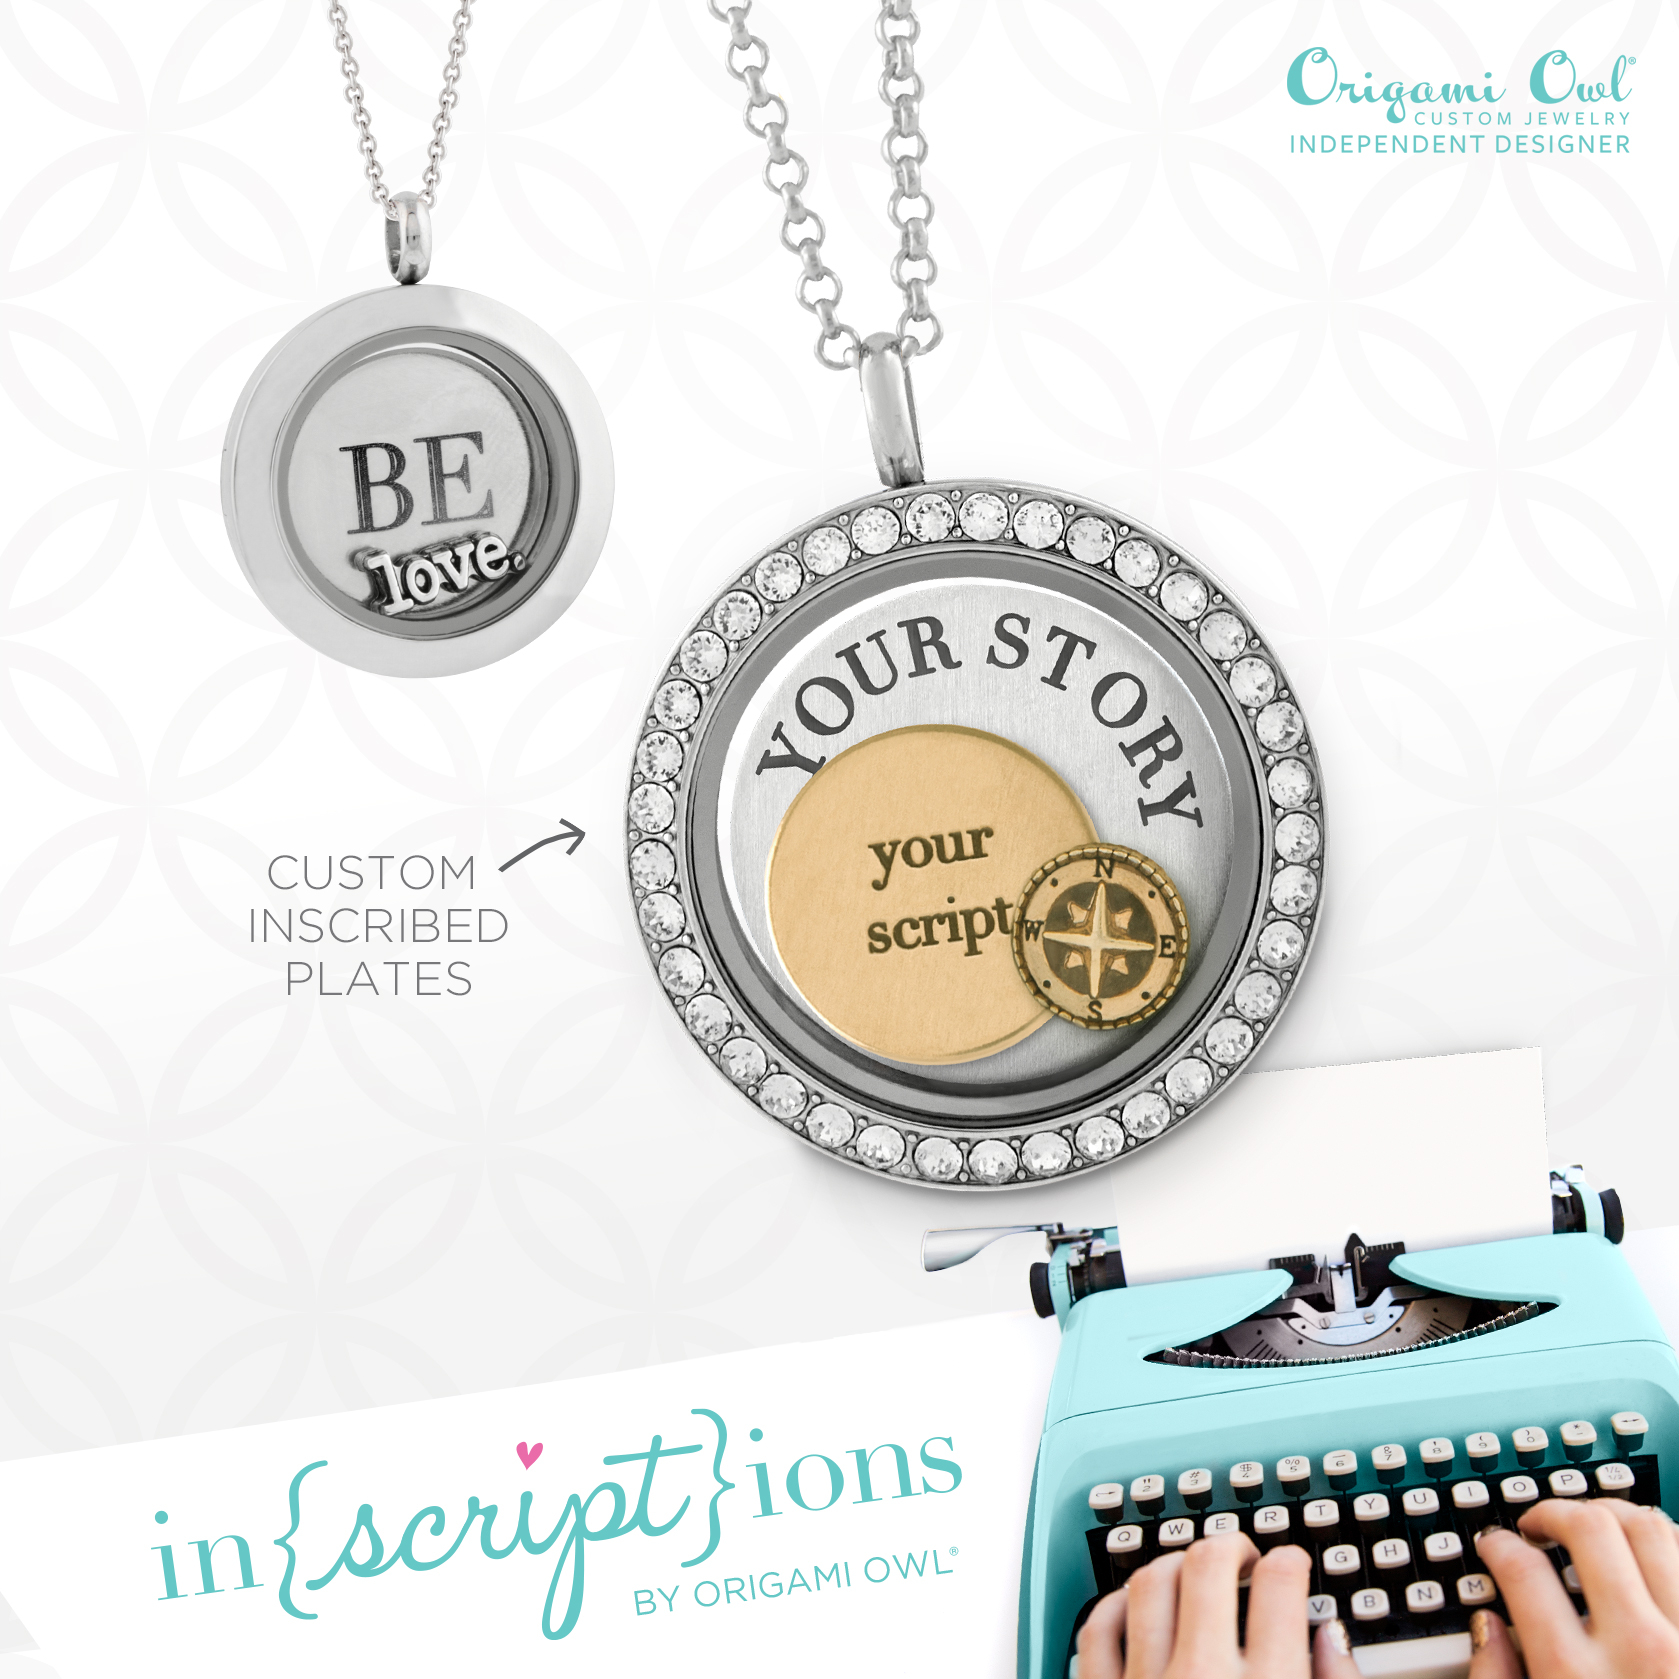 Origami Owl Spring 2015 This Is My Story A Bowl Full Of Lemons